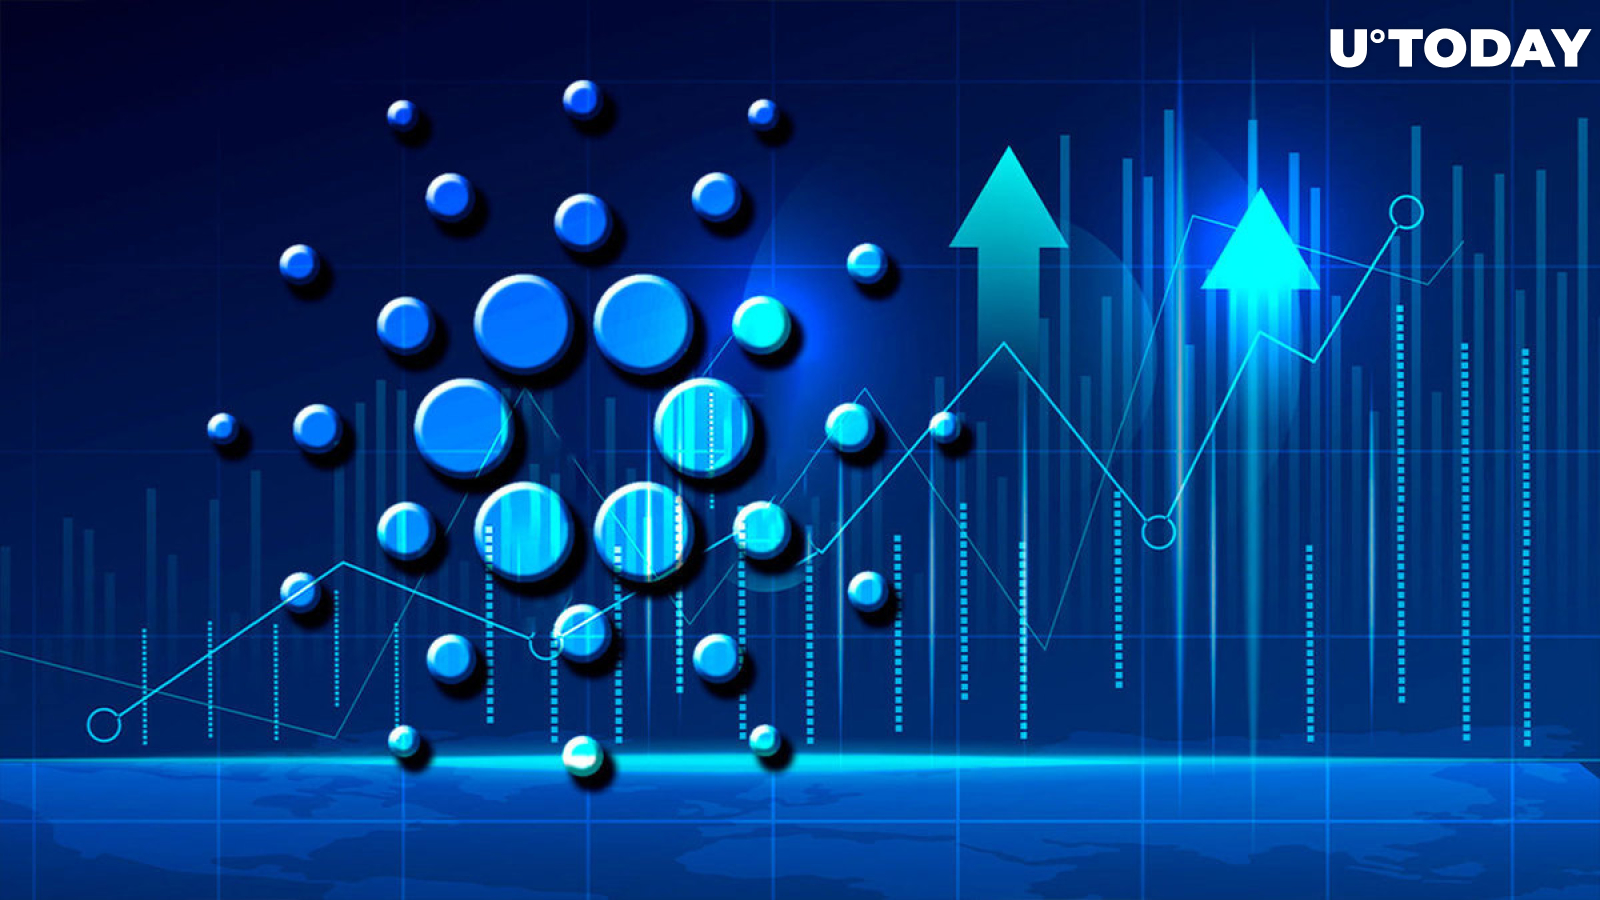 Cardano (ADA): Key Metrics Jump to Yearly Highs, What This Means for Price